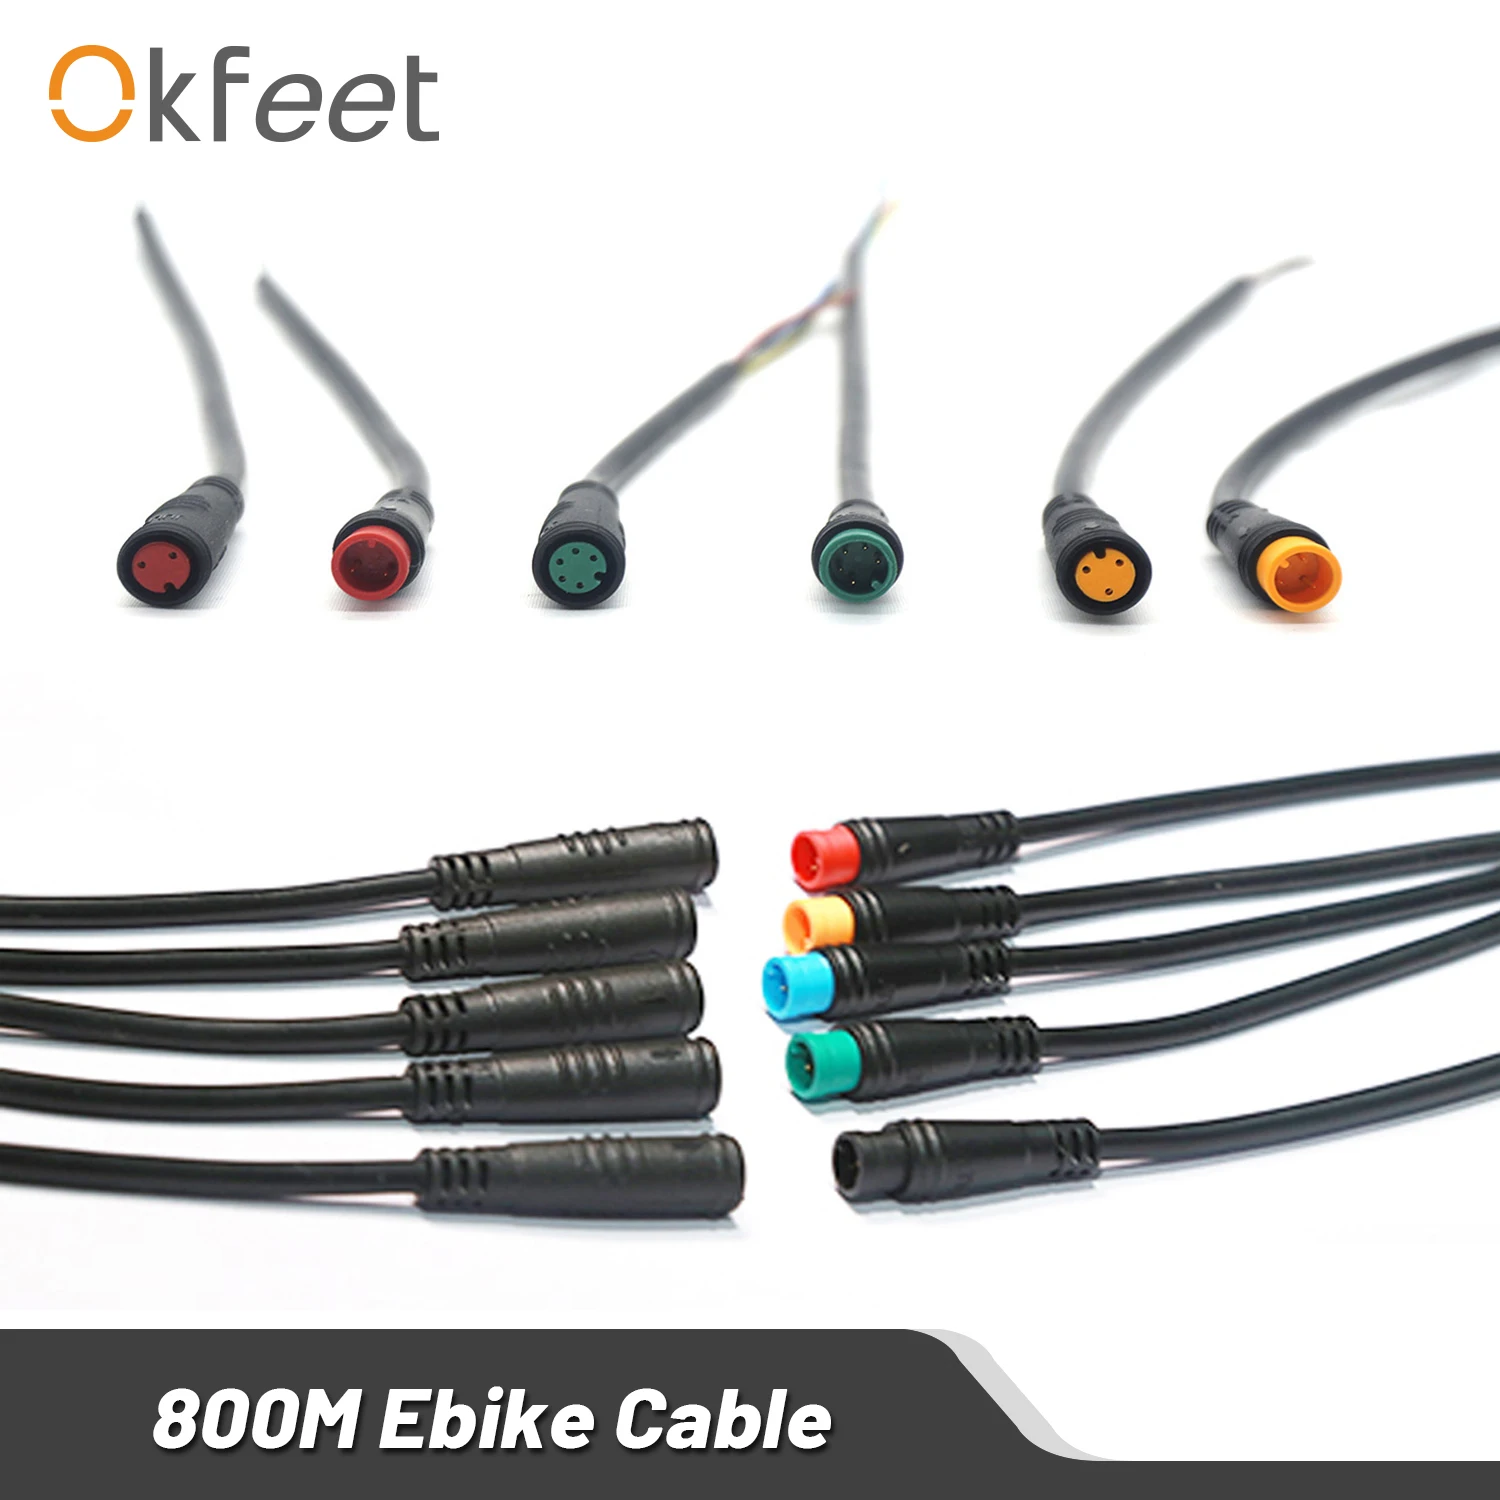 Julet Waterproof Cable 2/3/4/5/6 Pin Conversion Line Electrical Ebike Extension Cable Connector for Ebikes Display DIY The Throttle Display Ebrake Light to Ebikes for Adults 